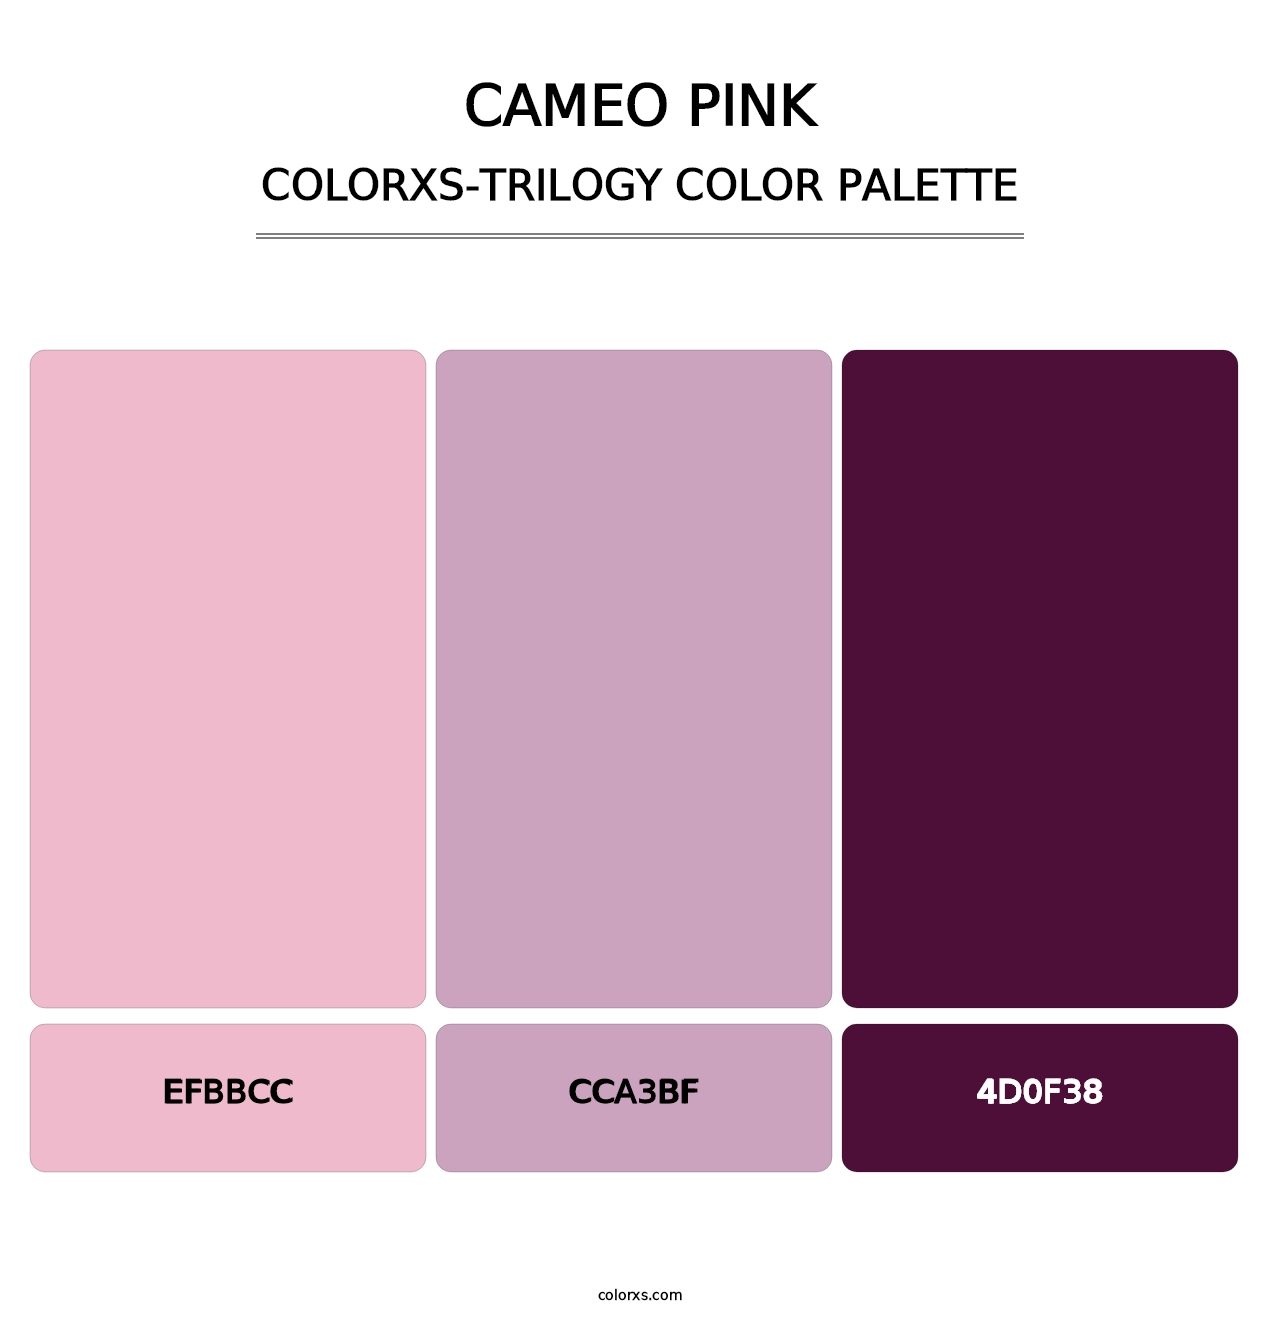 Cameo Pink - Colorxs Trilogy Palette